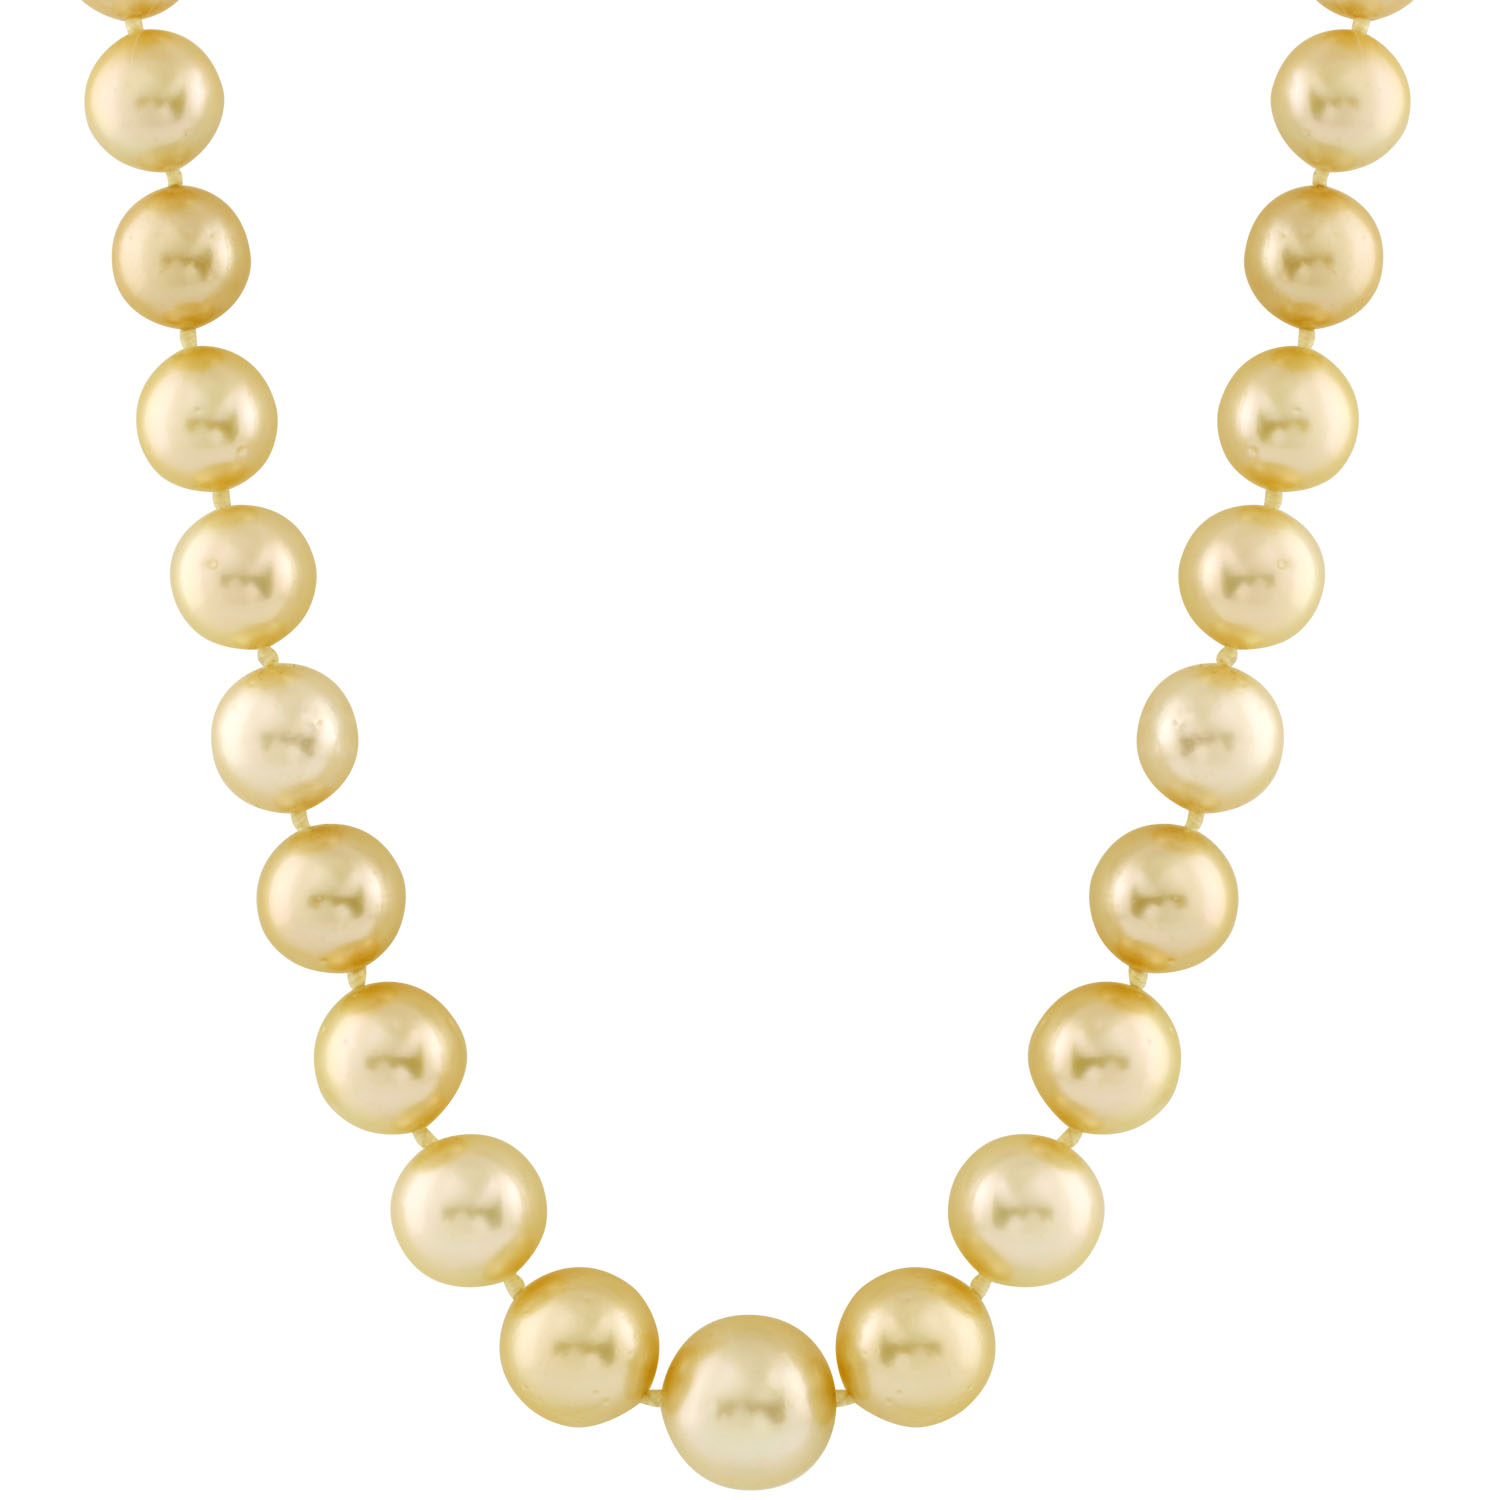 Golden south sea pearl necklace